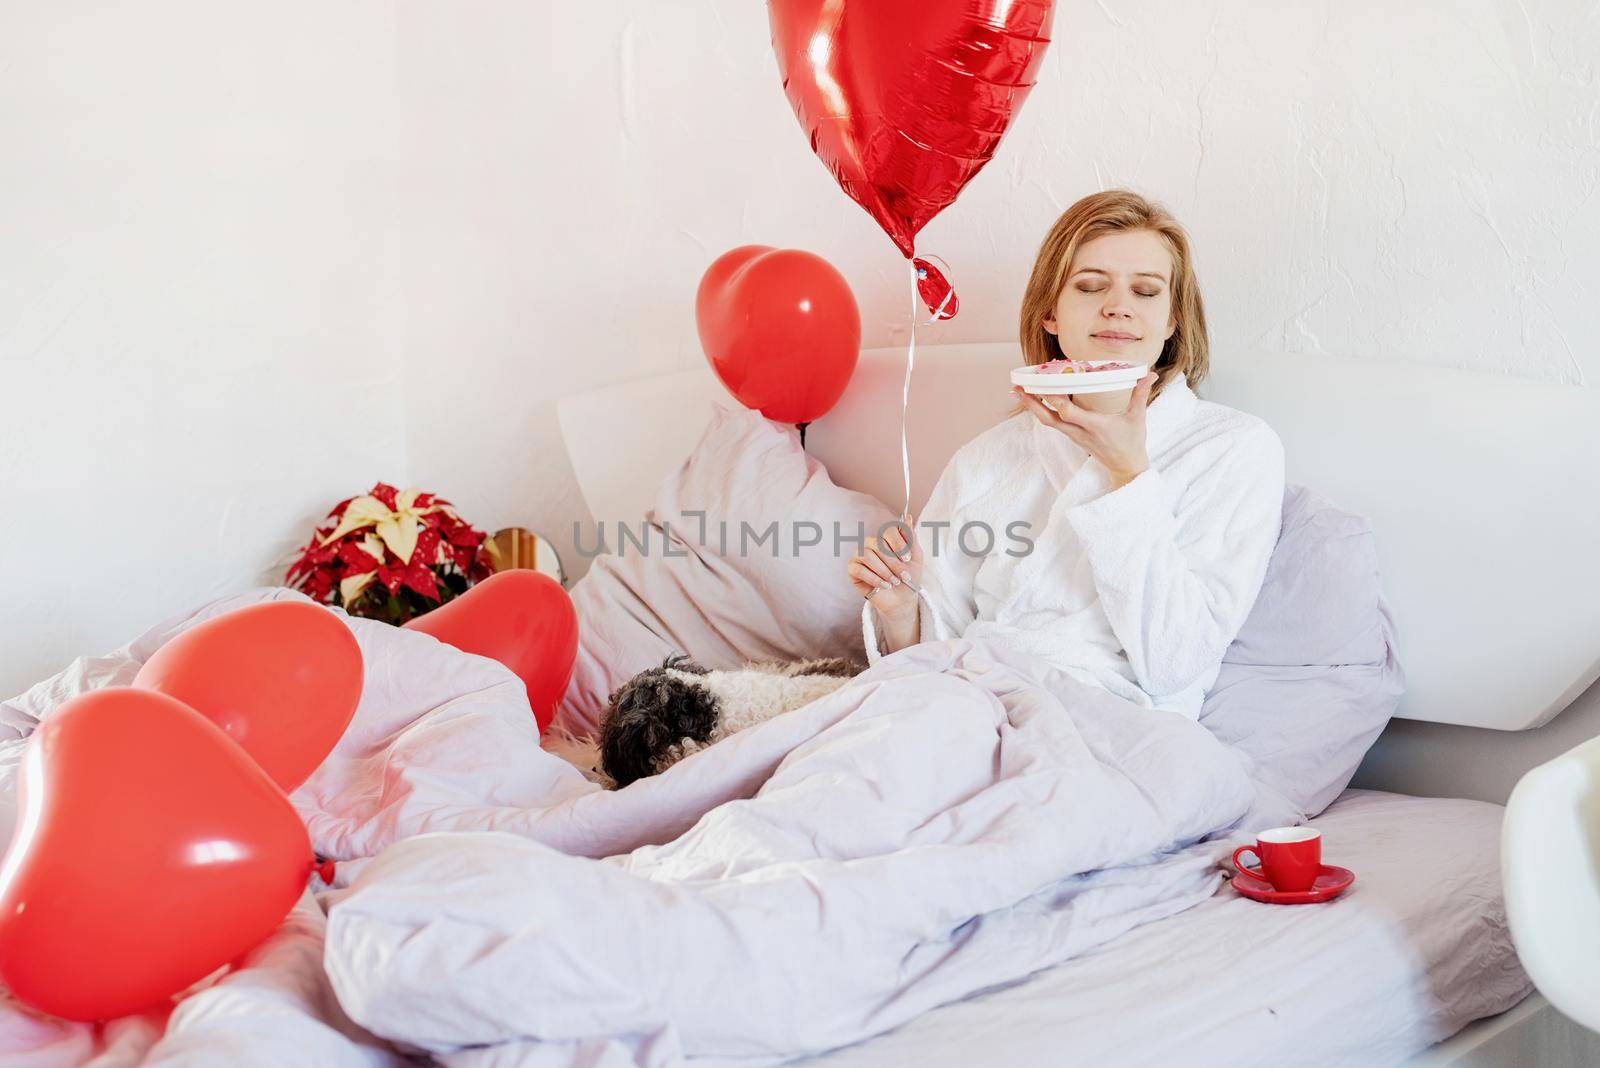 Happy valentines day. young woman lying on the bed and looking at red balloon